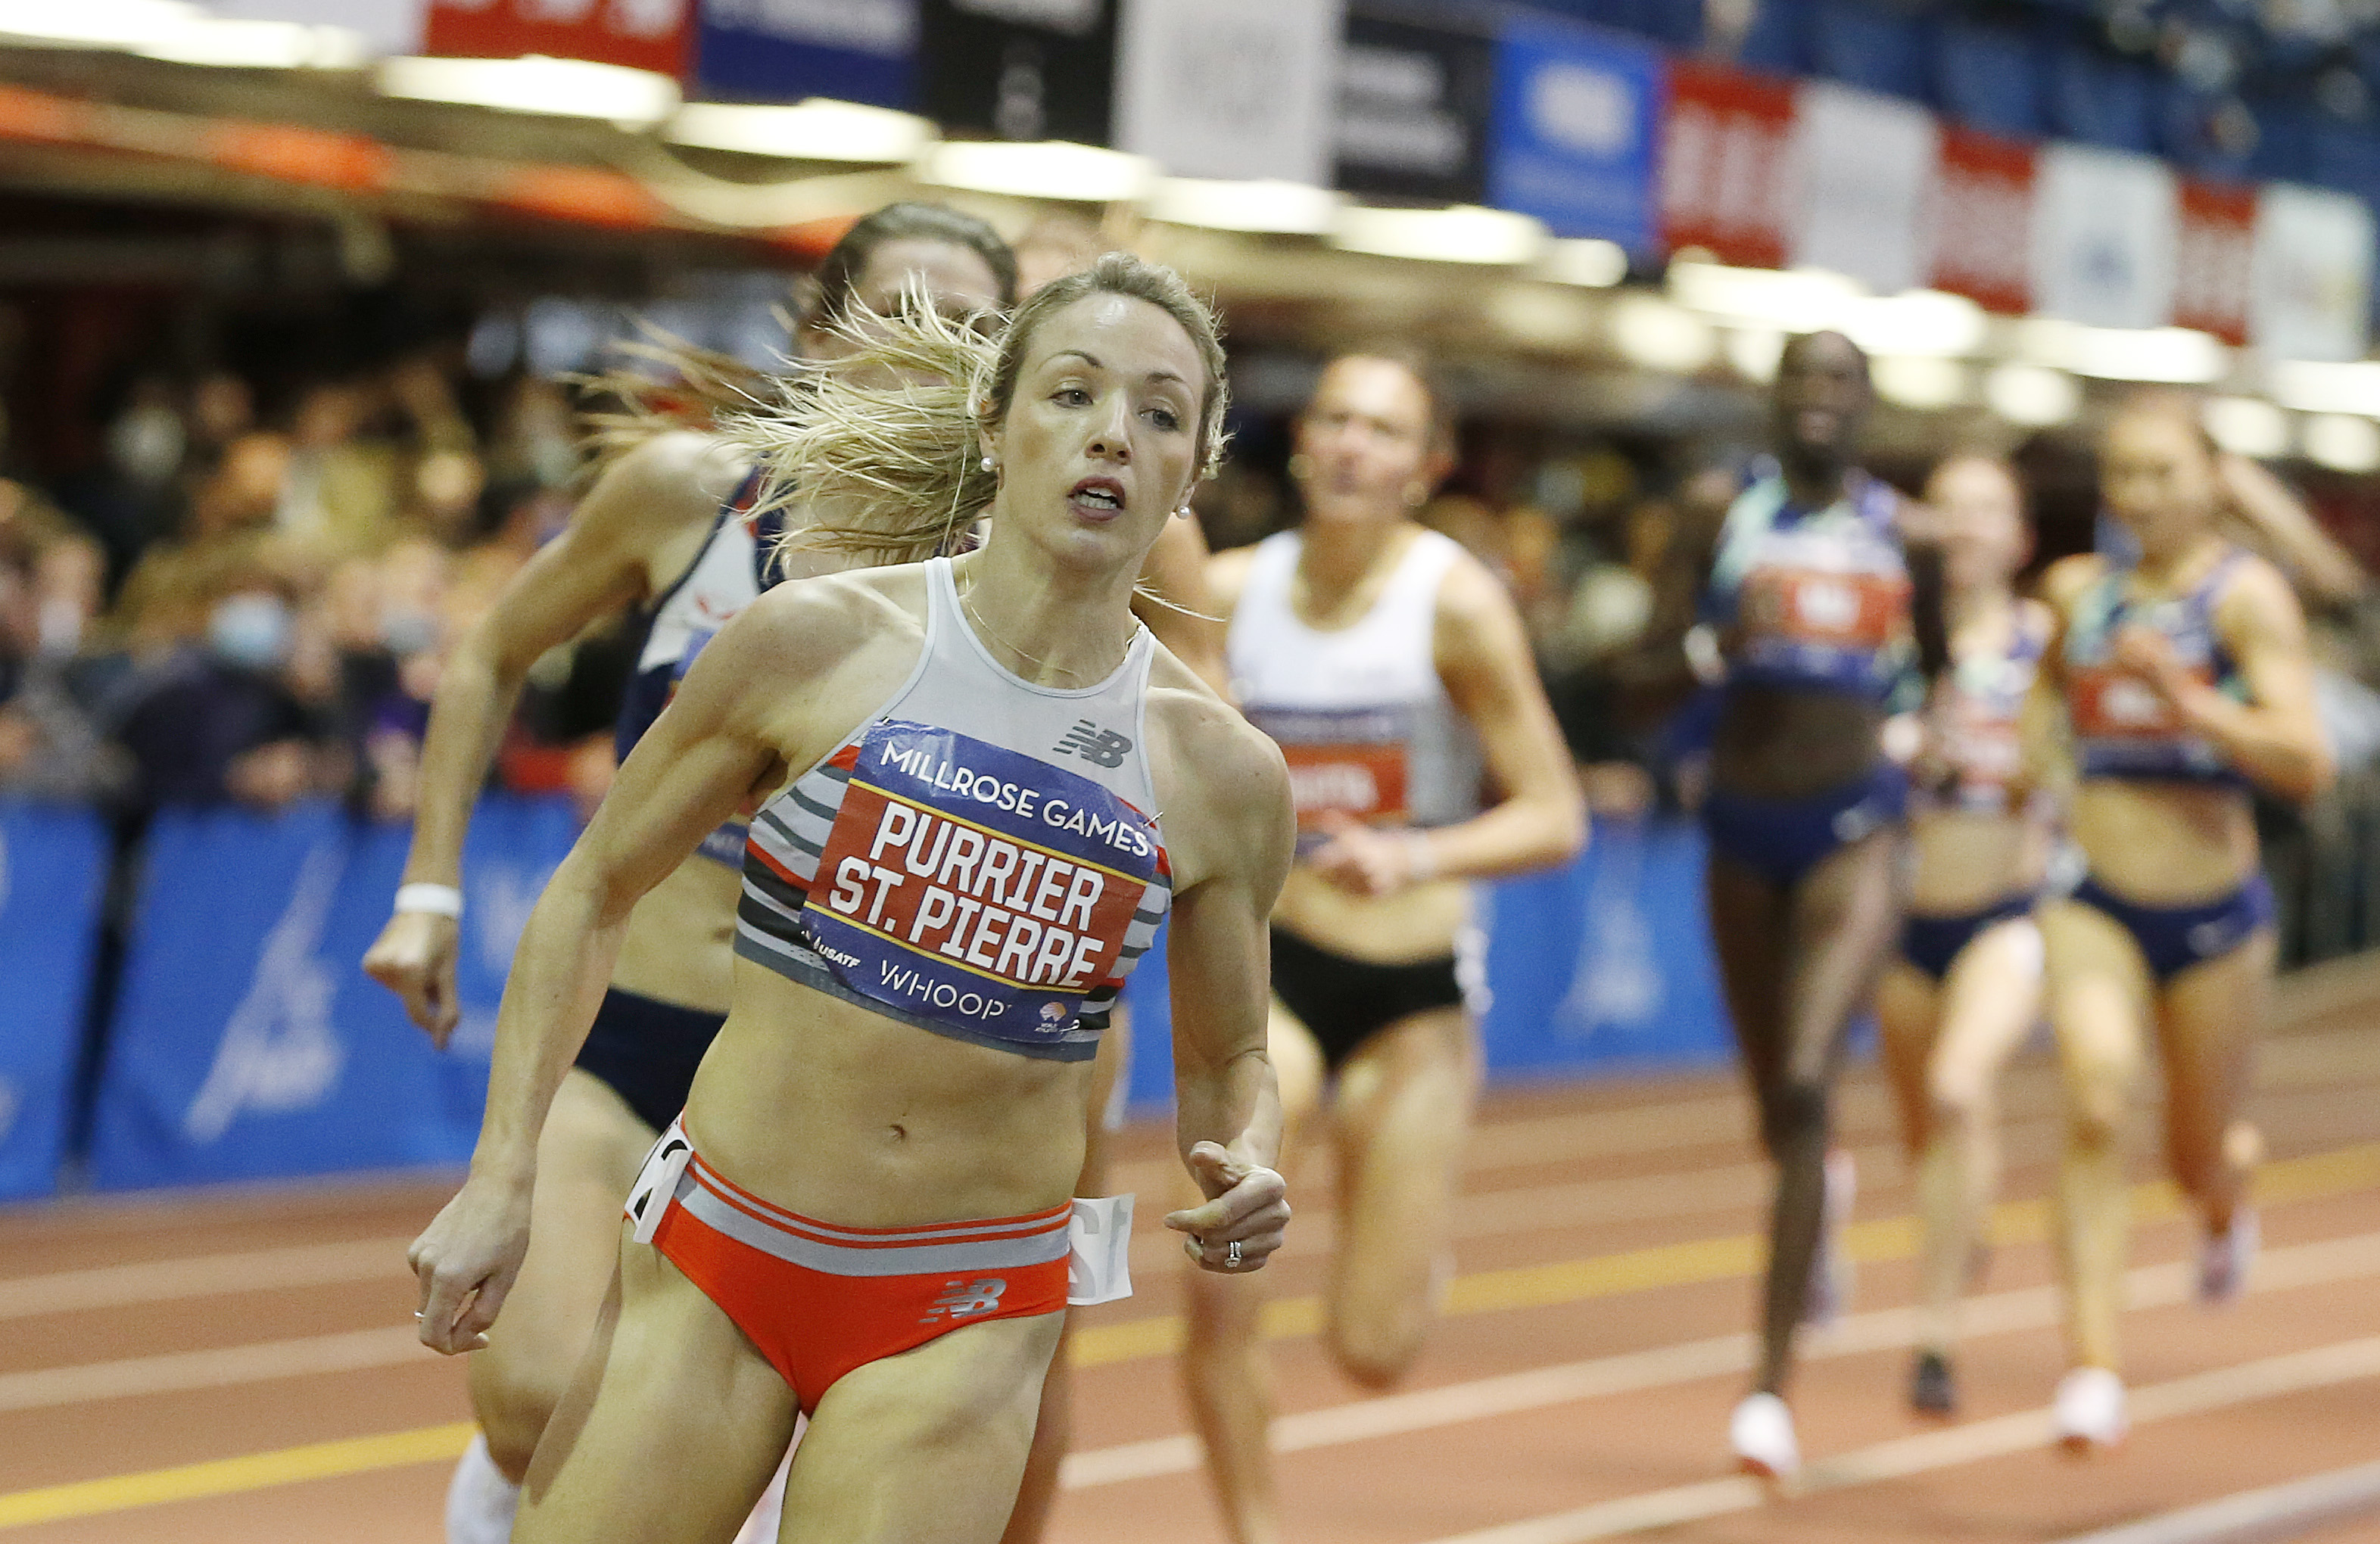 Elle Purrier St. Pierre of the United States leads the field during the Whoop Wanamaker Mile during the 114th Millrose Games held at The Armory Track on January 29, 2022 in New York City. (Michael Cohen—Getty Images)